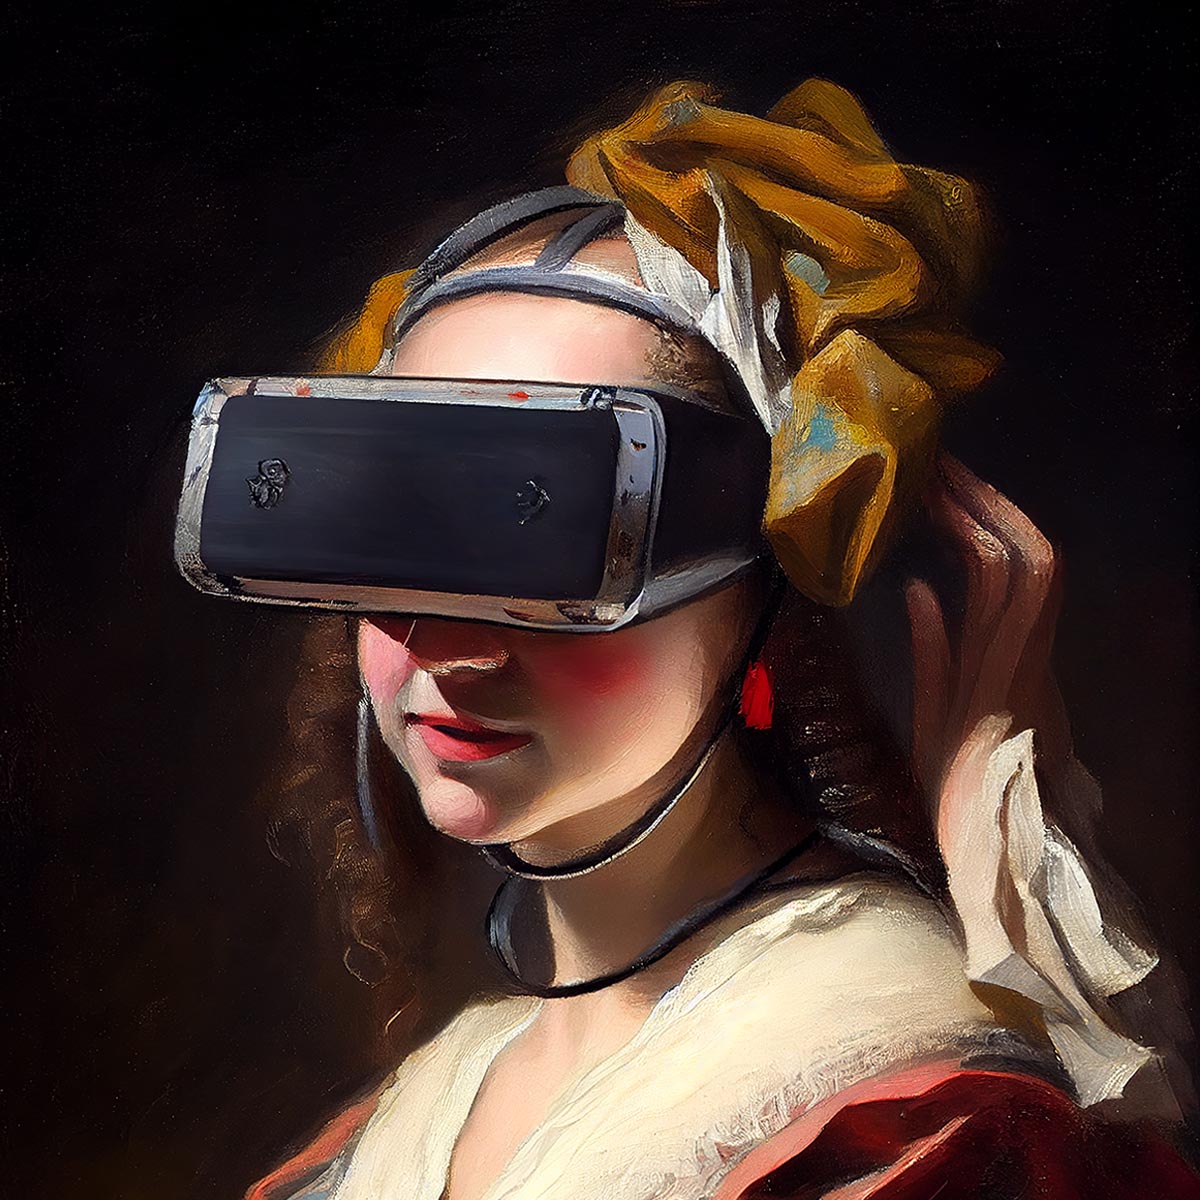 "VR Experience" canvas print